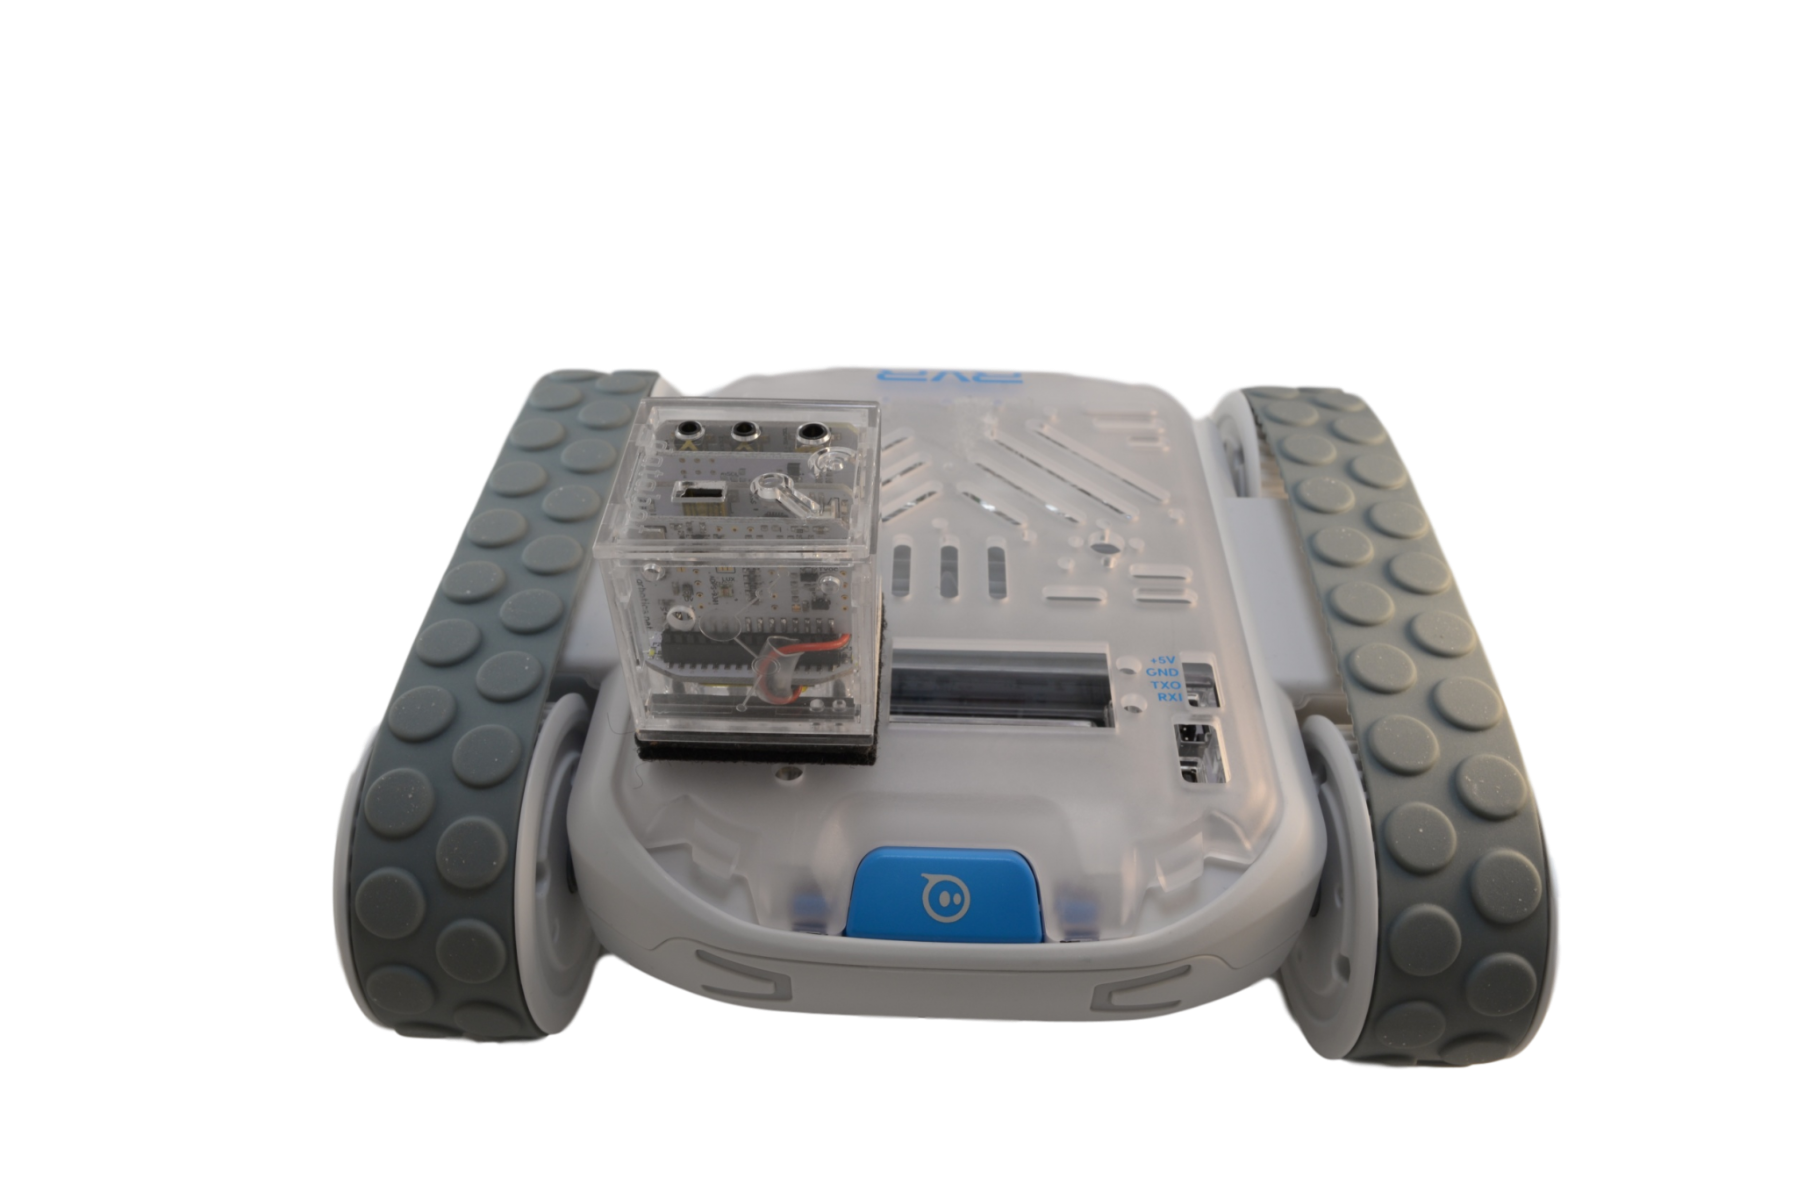 the sphero rvr robot and databot robot from the front